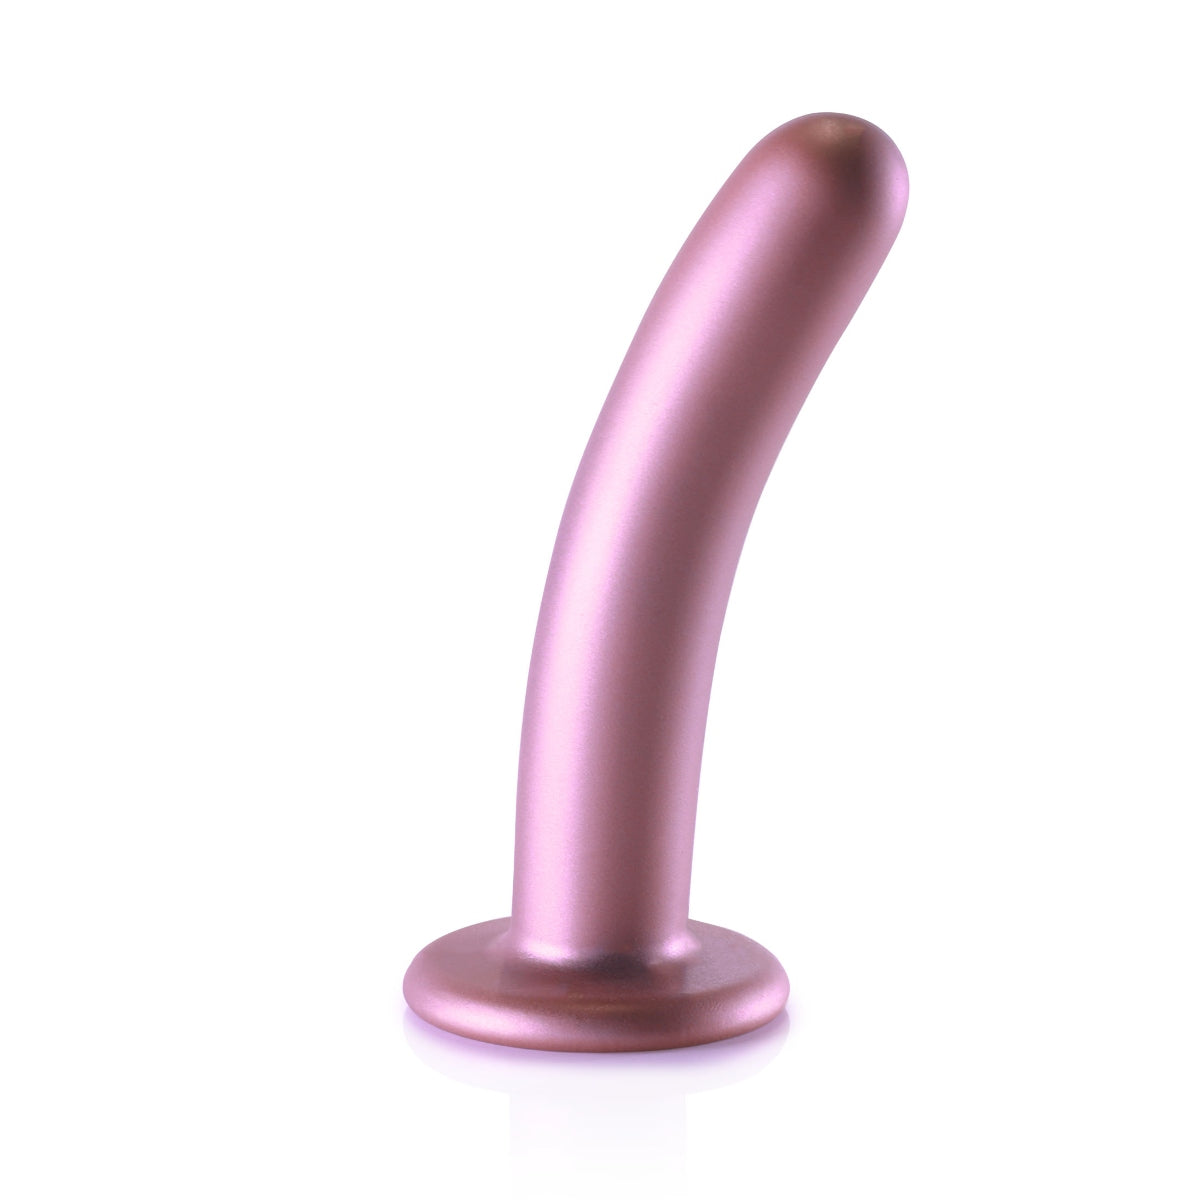 Ouch Smooth Silicone G Spot Dildo 6inch Metallic Rose